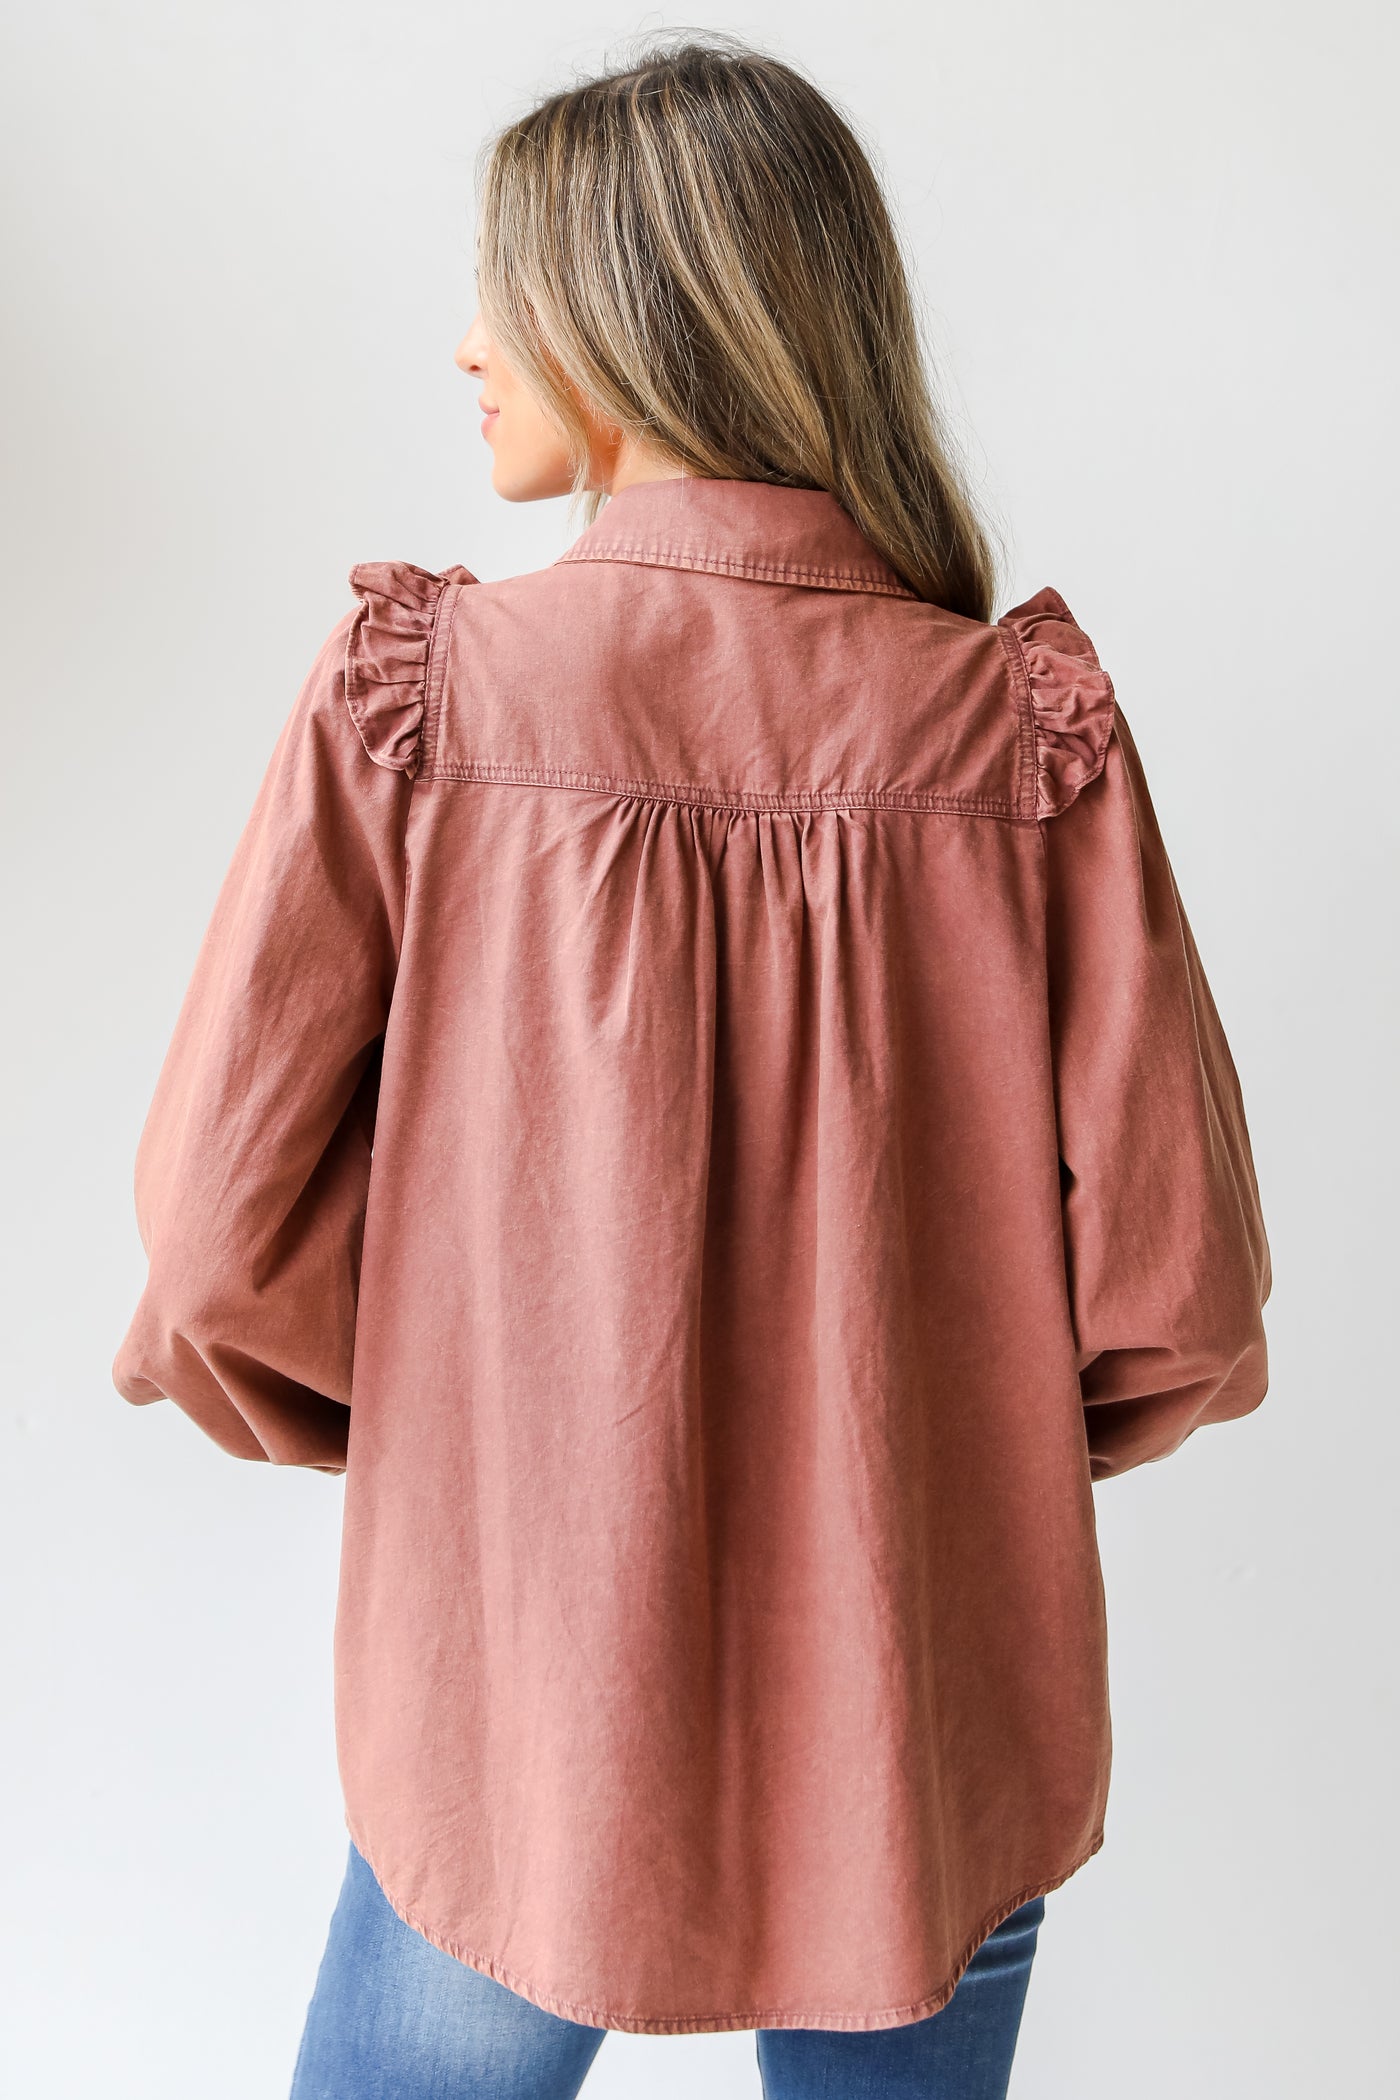 Ruffled Button-Up Blouse back view